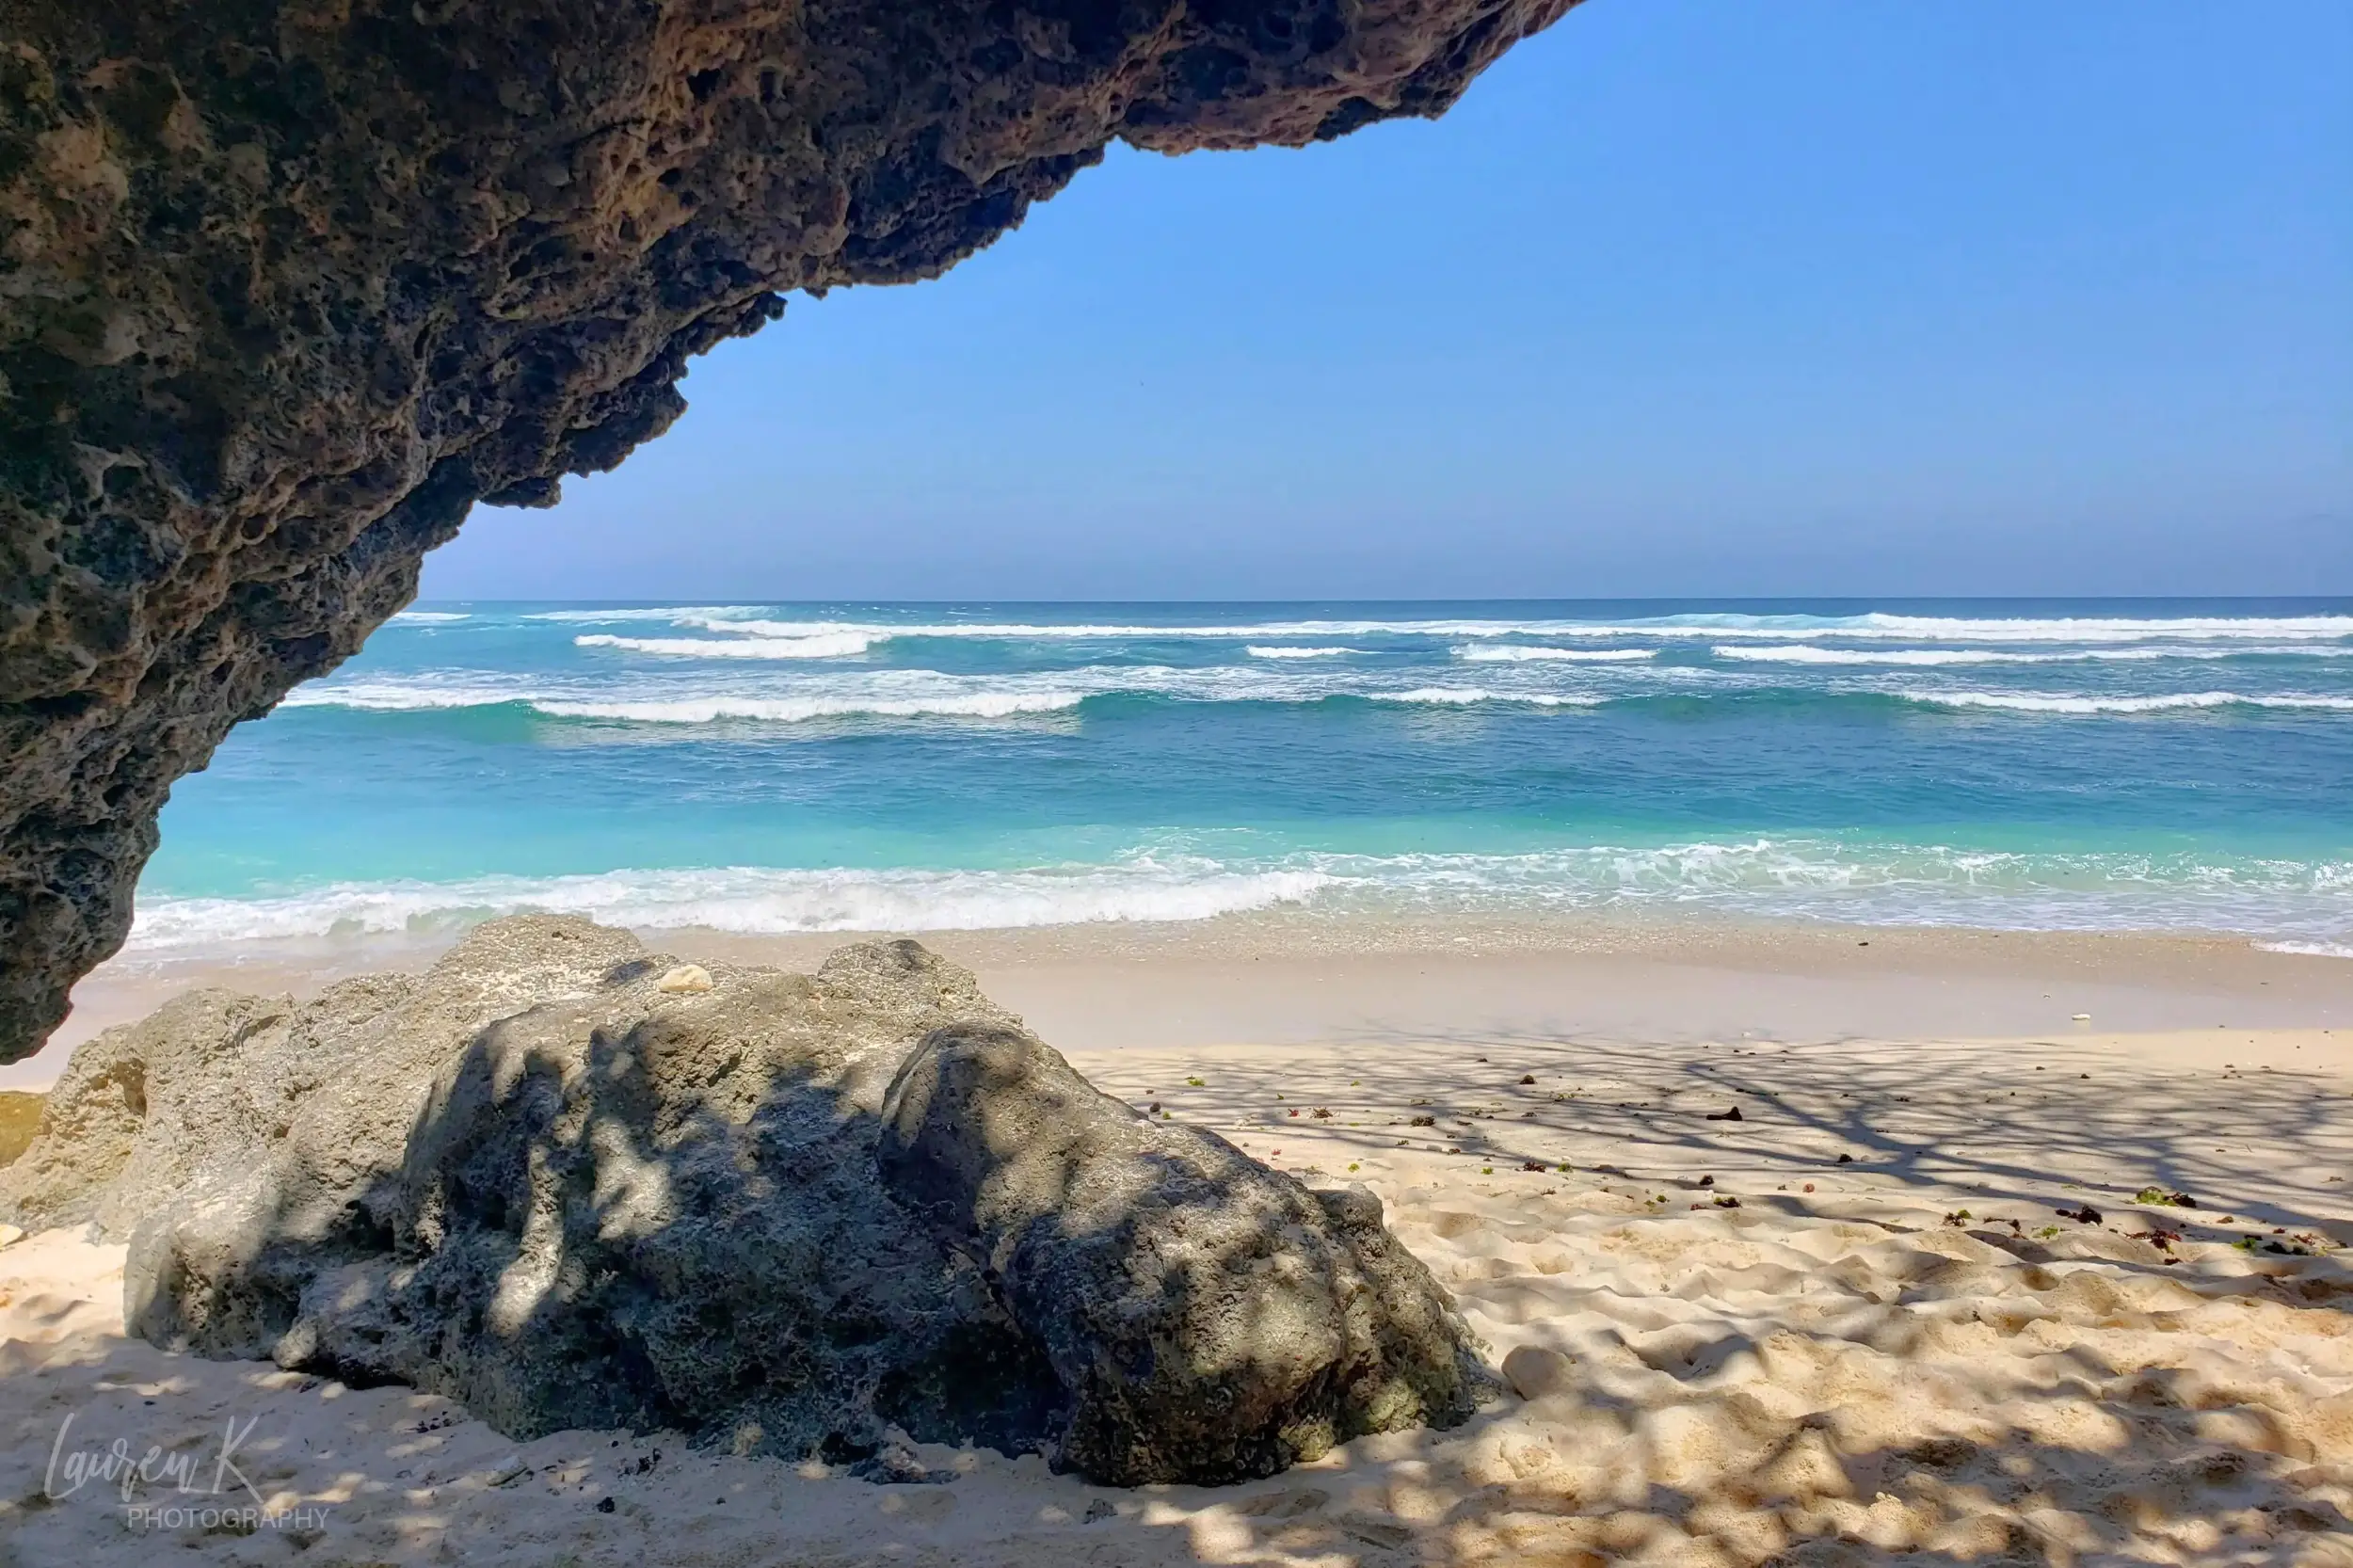 The cover image of the Uluwatu Beaches blog by Inspired Backpacker, which is a guide to the top beaches in the area. This image shows Green Bowl Beach cave